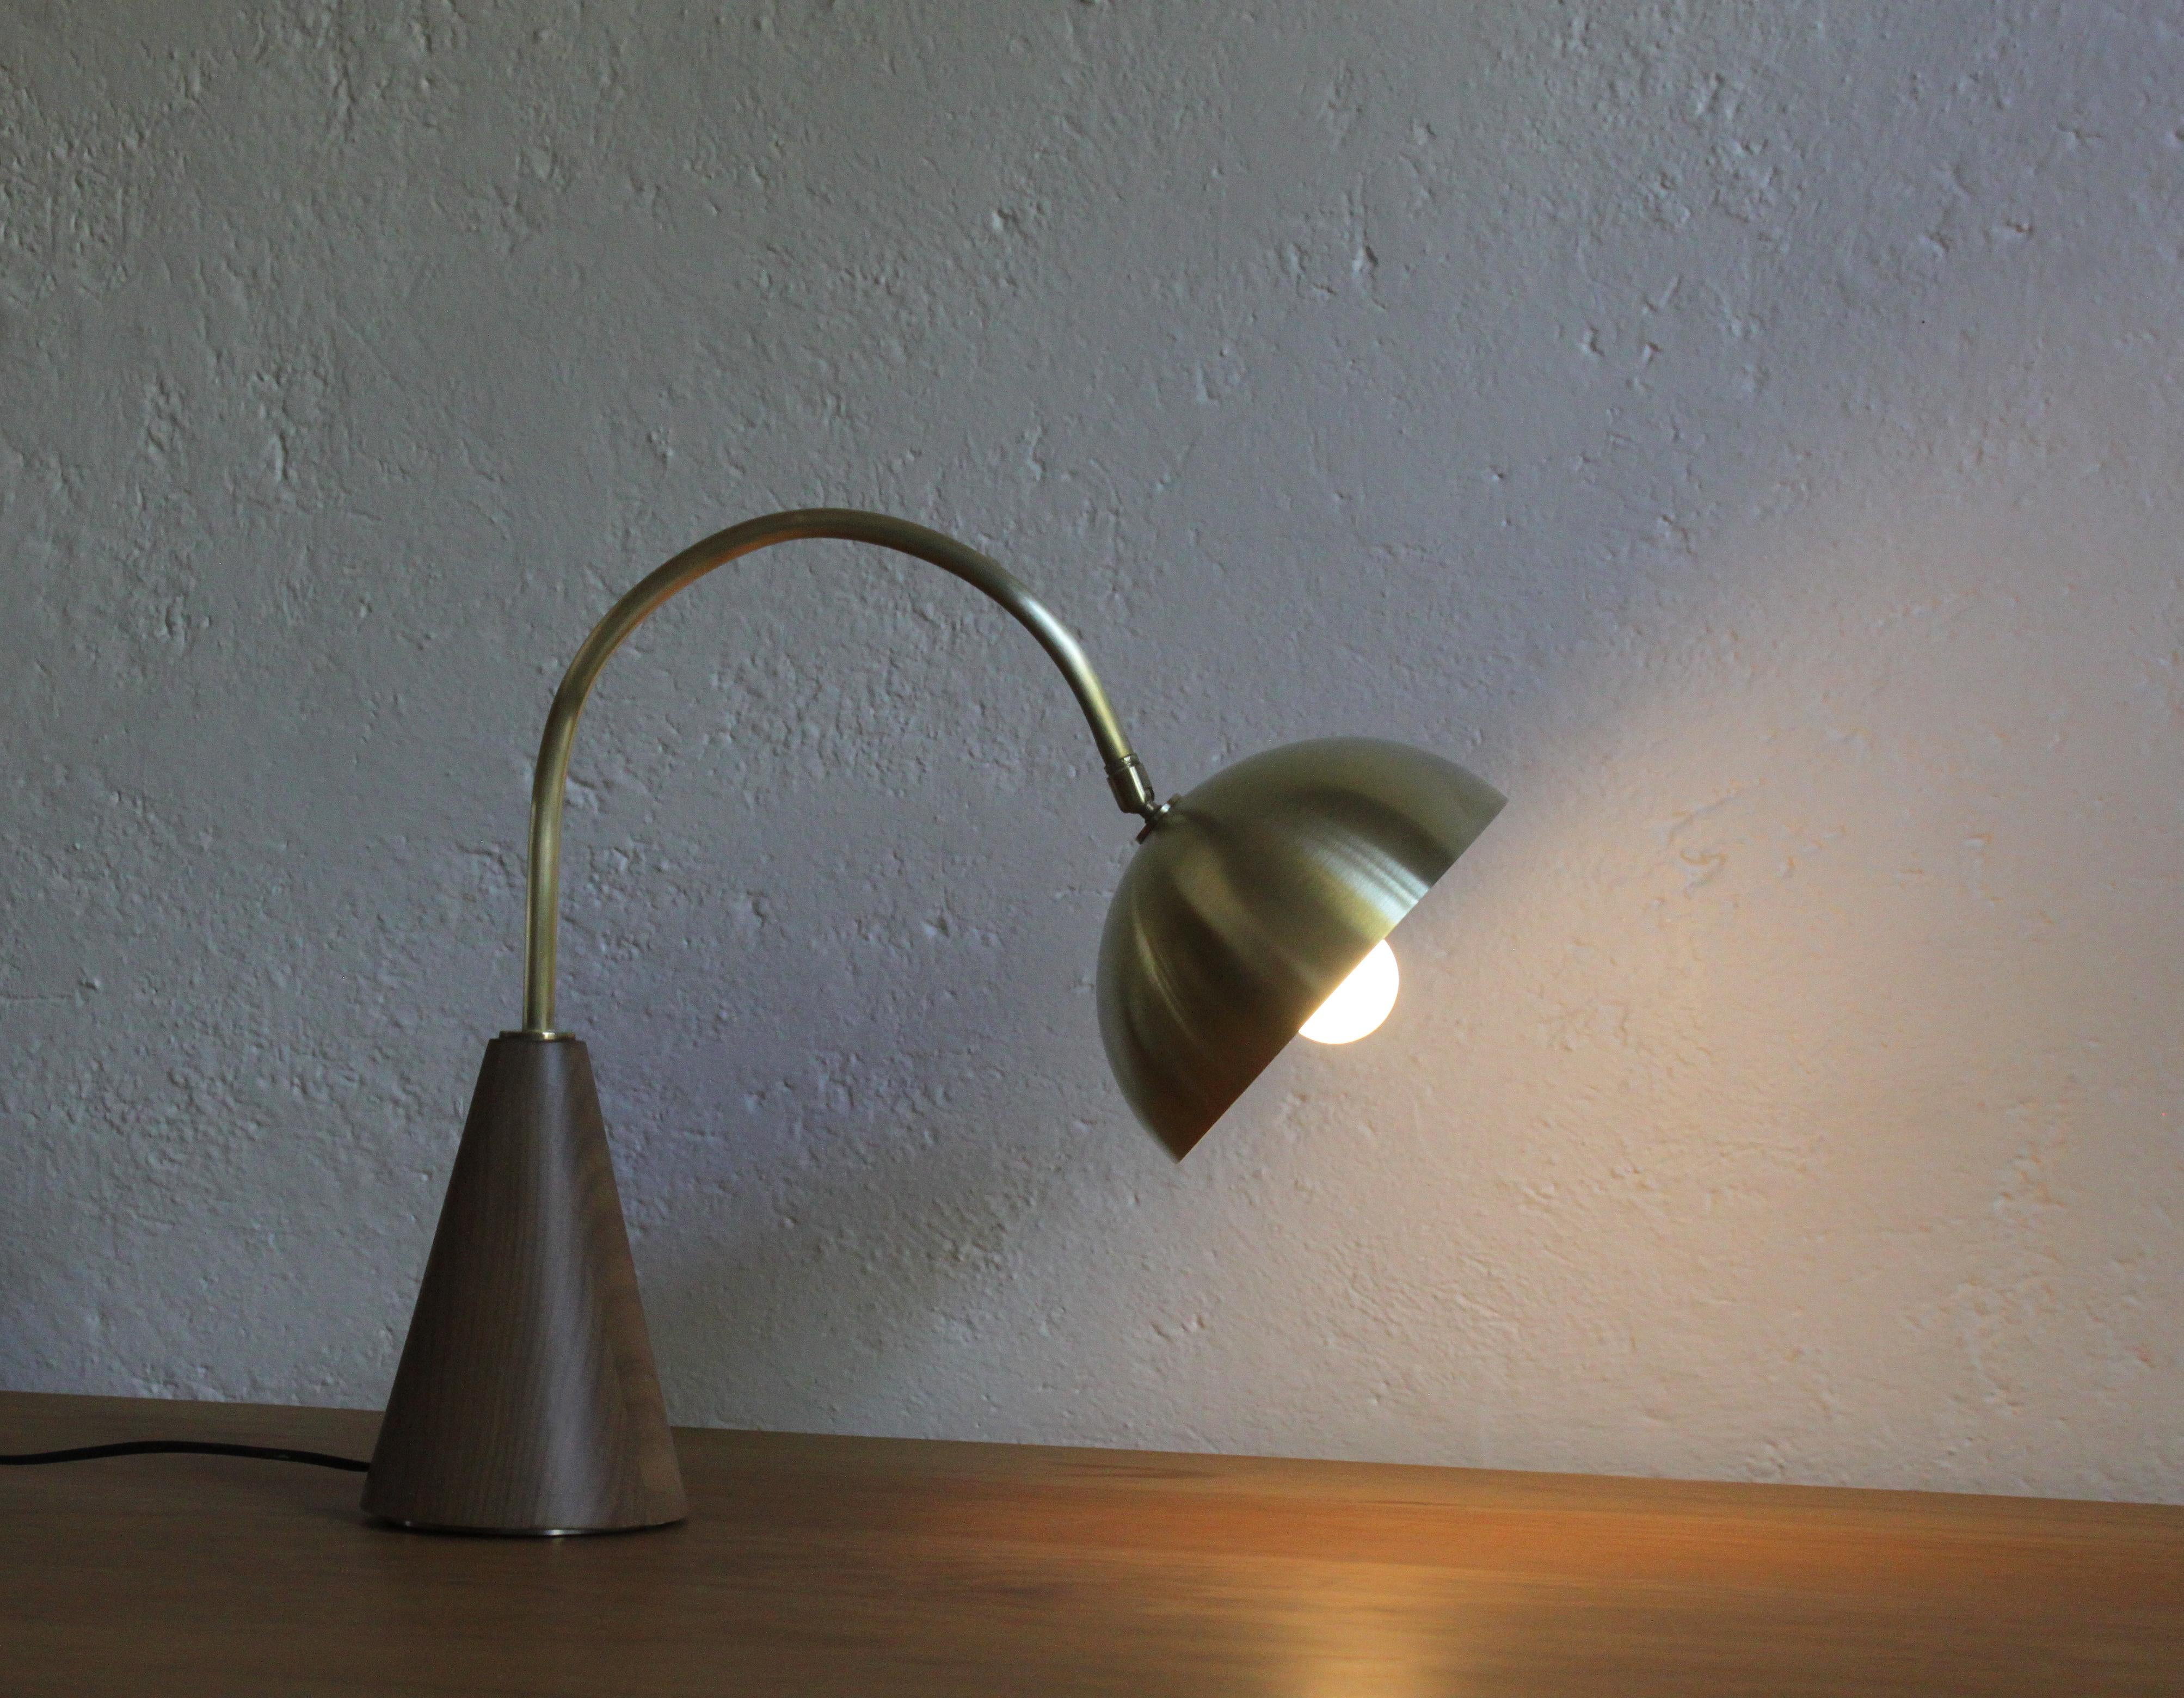 Arco De Mesa Table Lamp by Maria Beckmann, Represented by Tuleste Factory 1